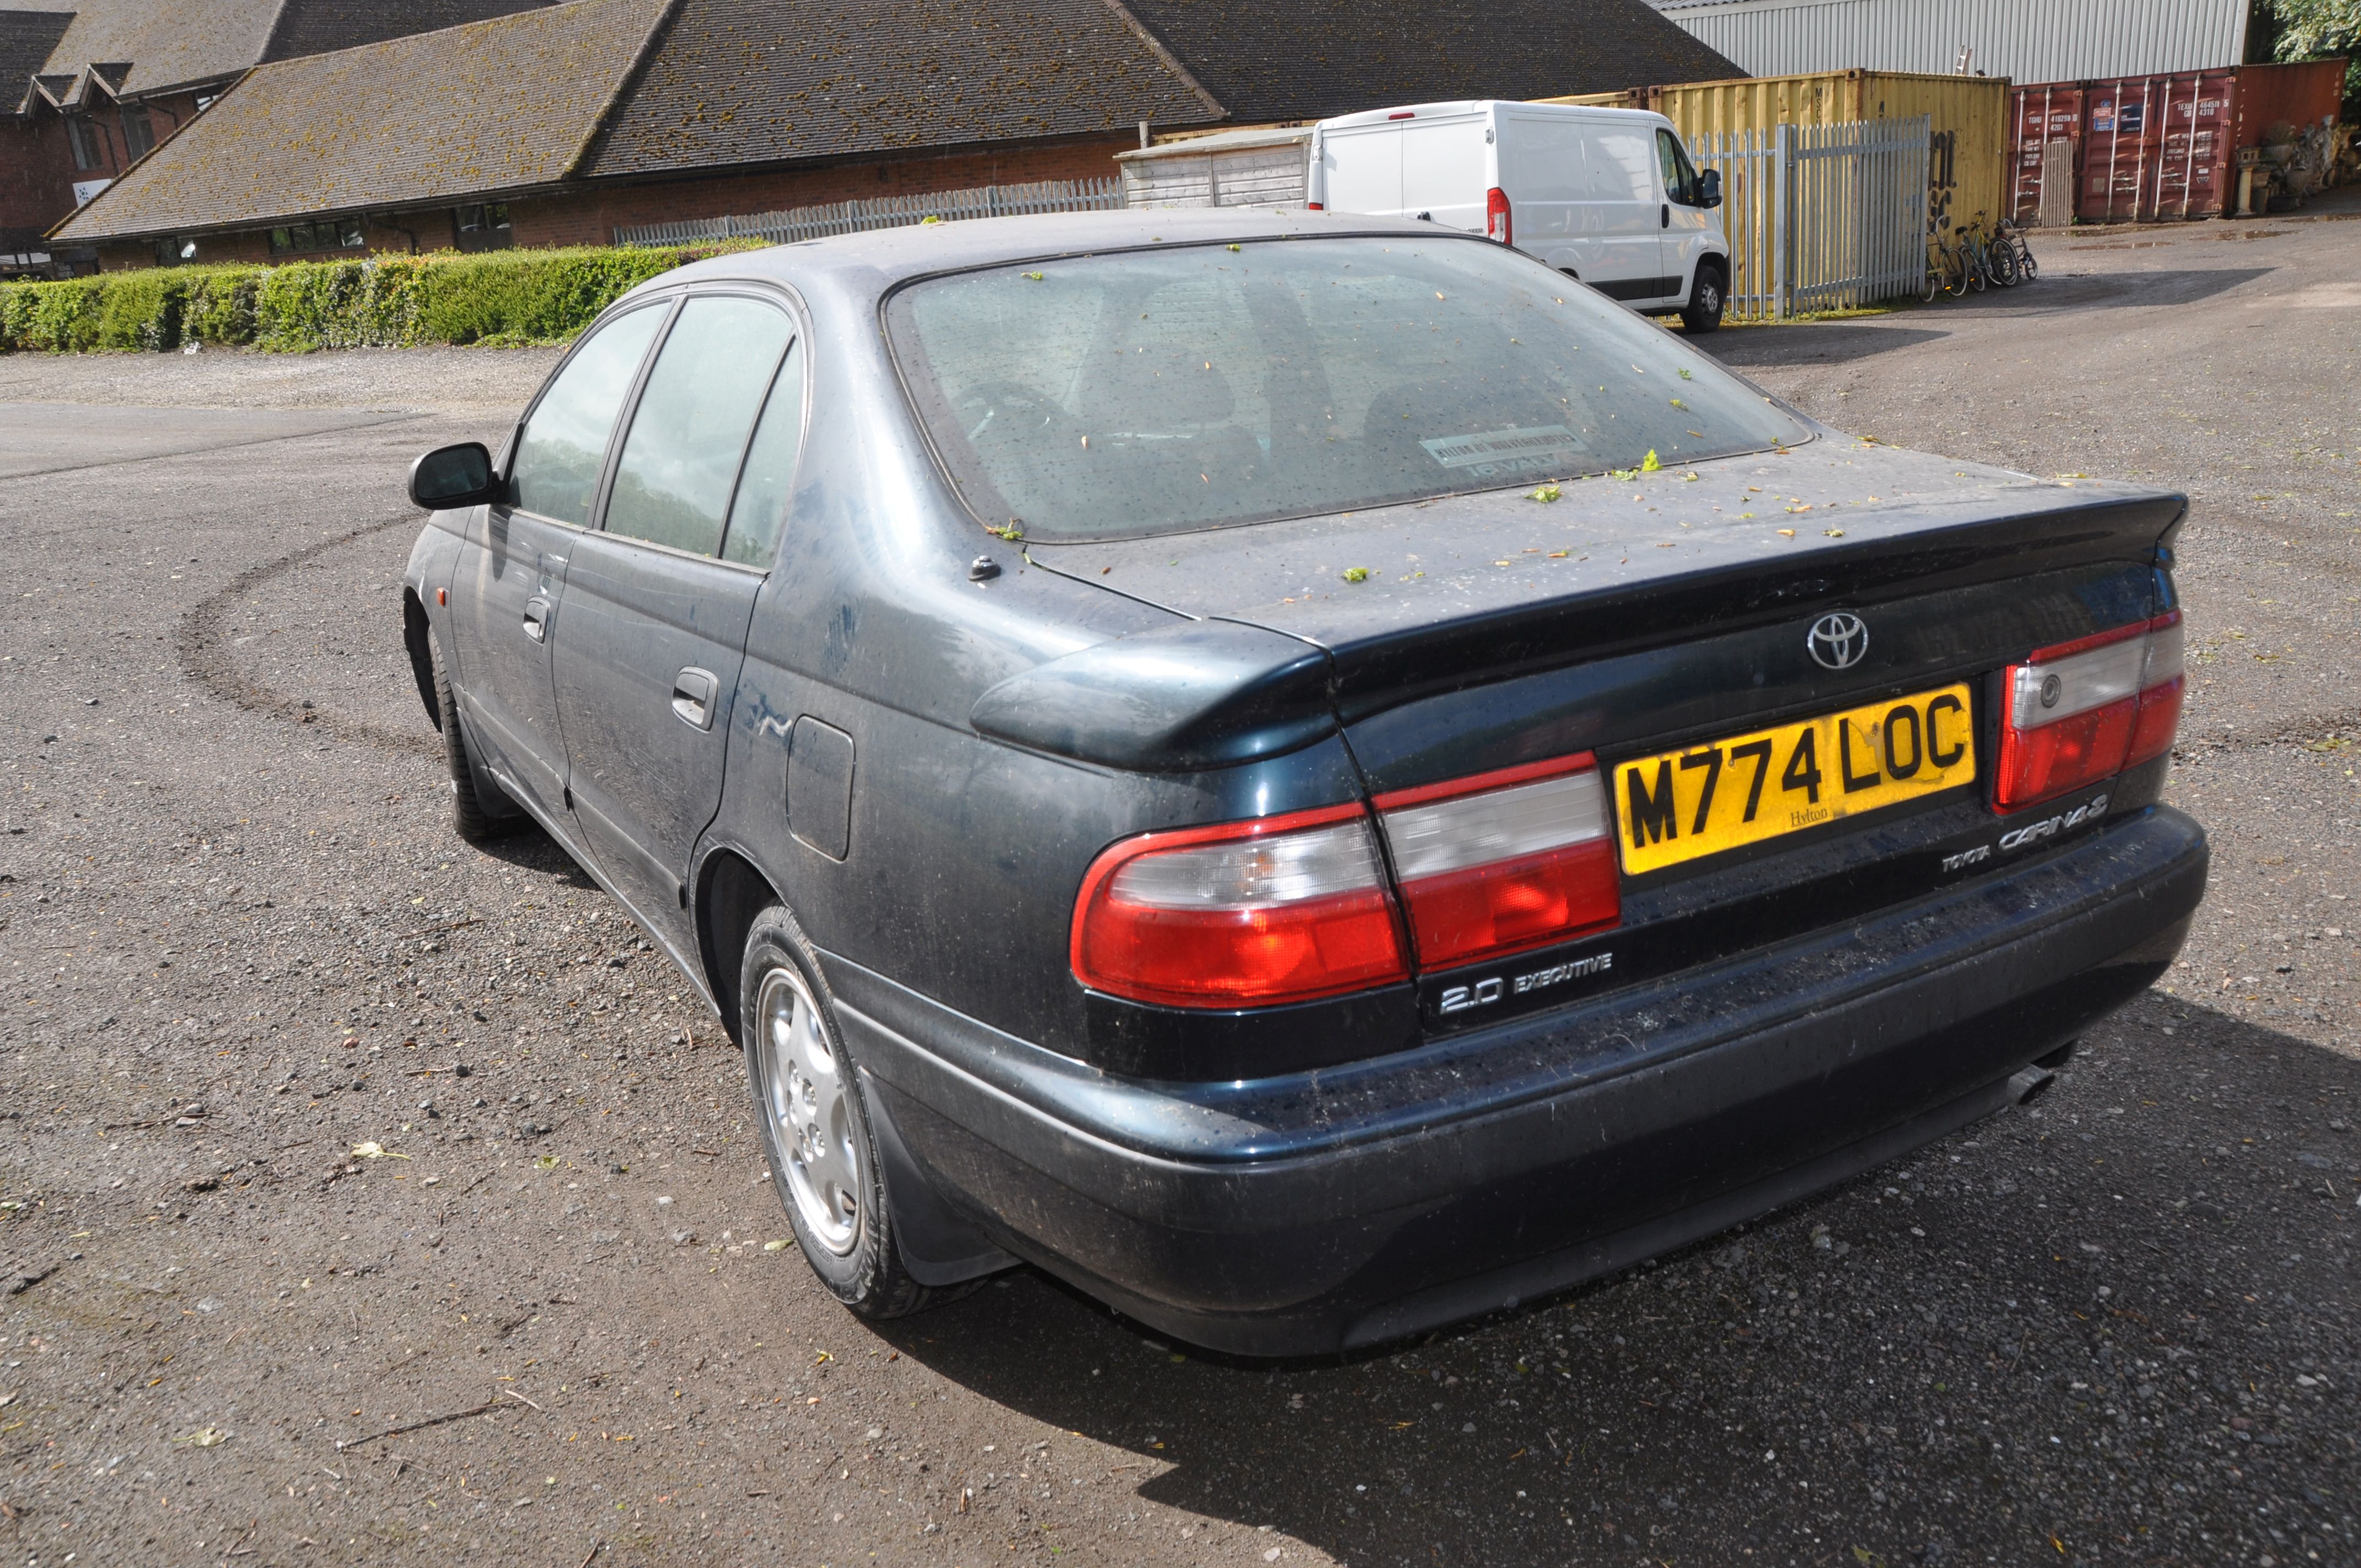 A 1994 TOYOTA CARINA E EXECUTIVE A FOUR DOOR SALOON CAR in blue, first registered 30/9/1994 under - Image 3 of 13